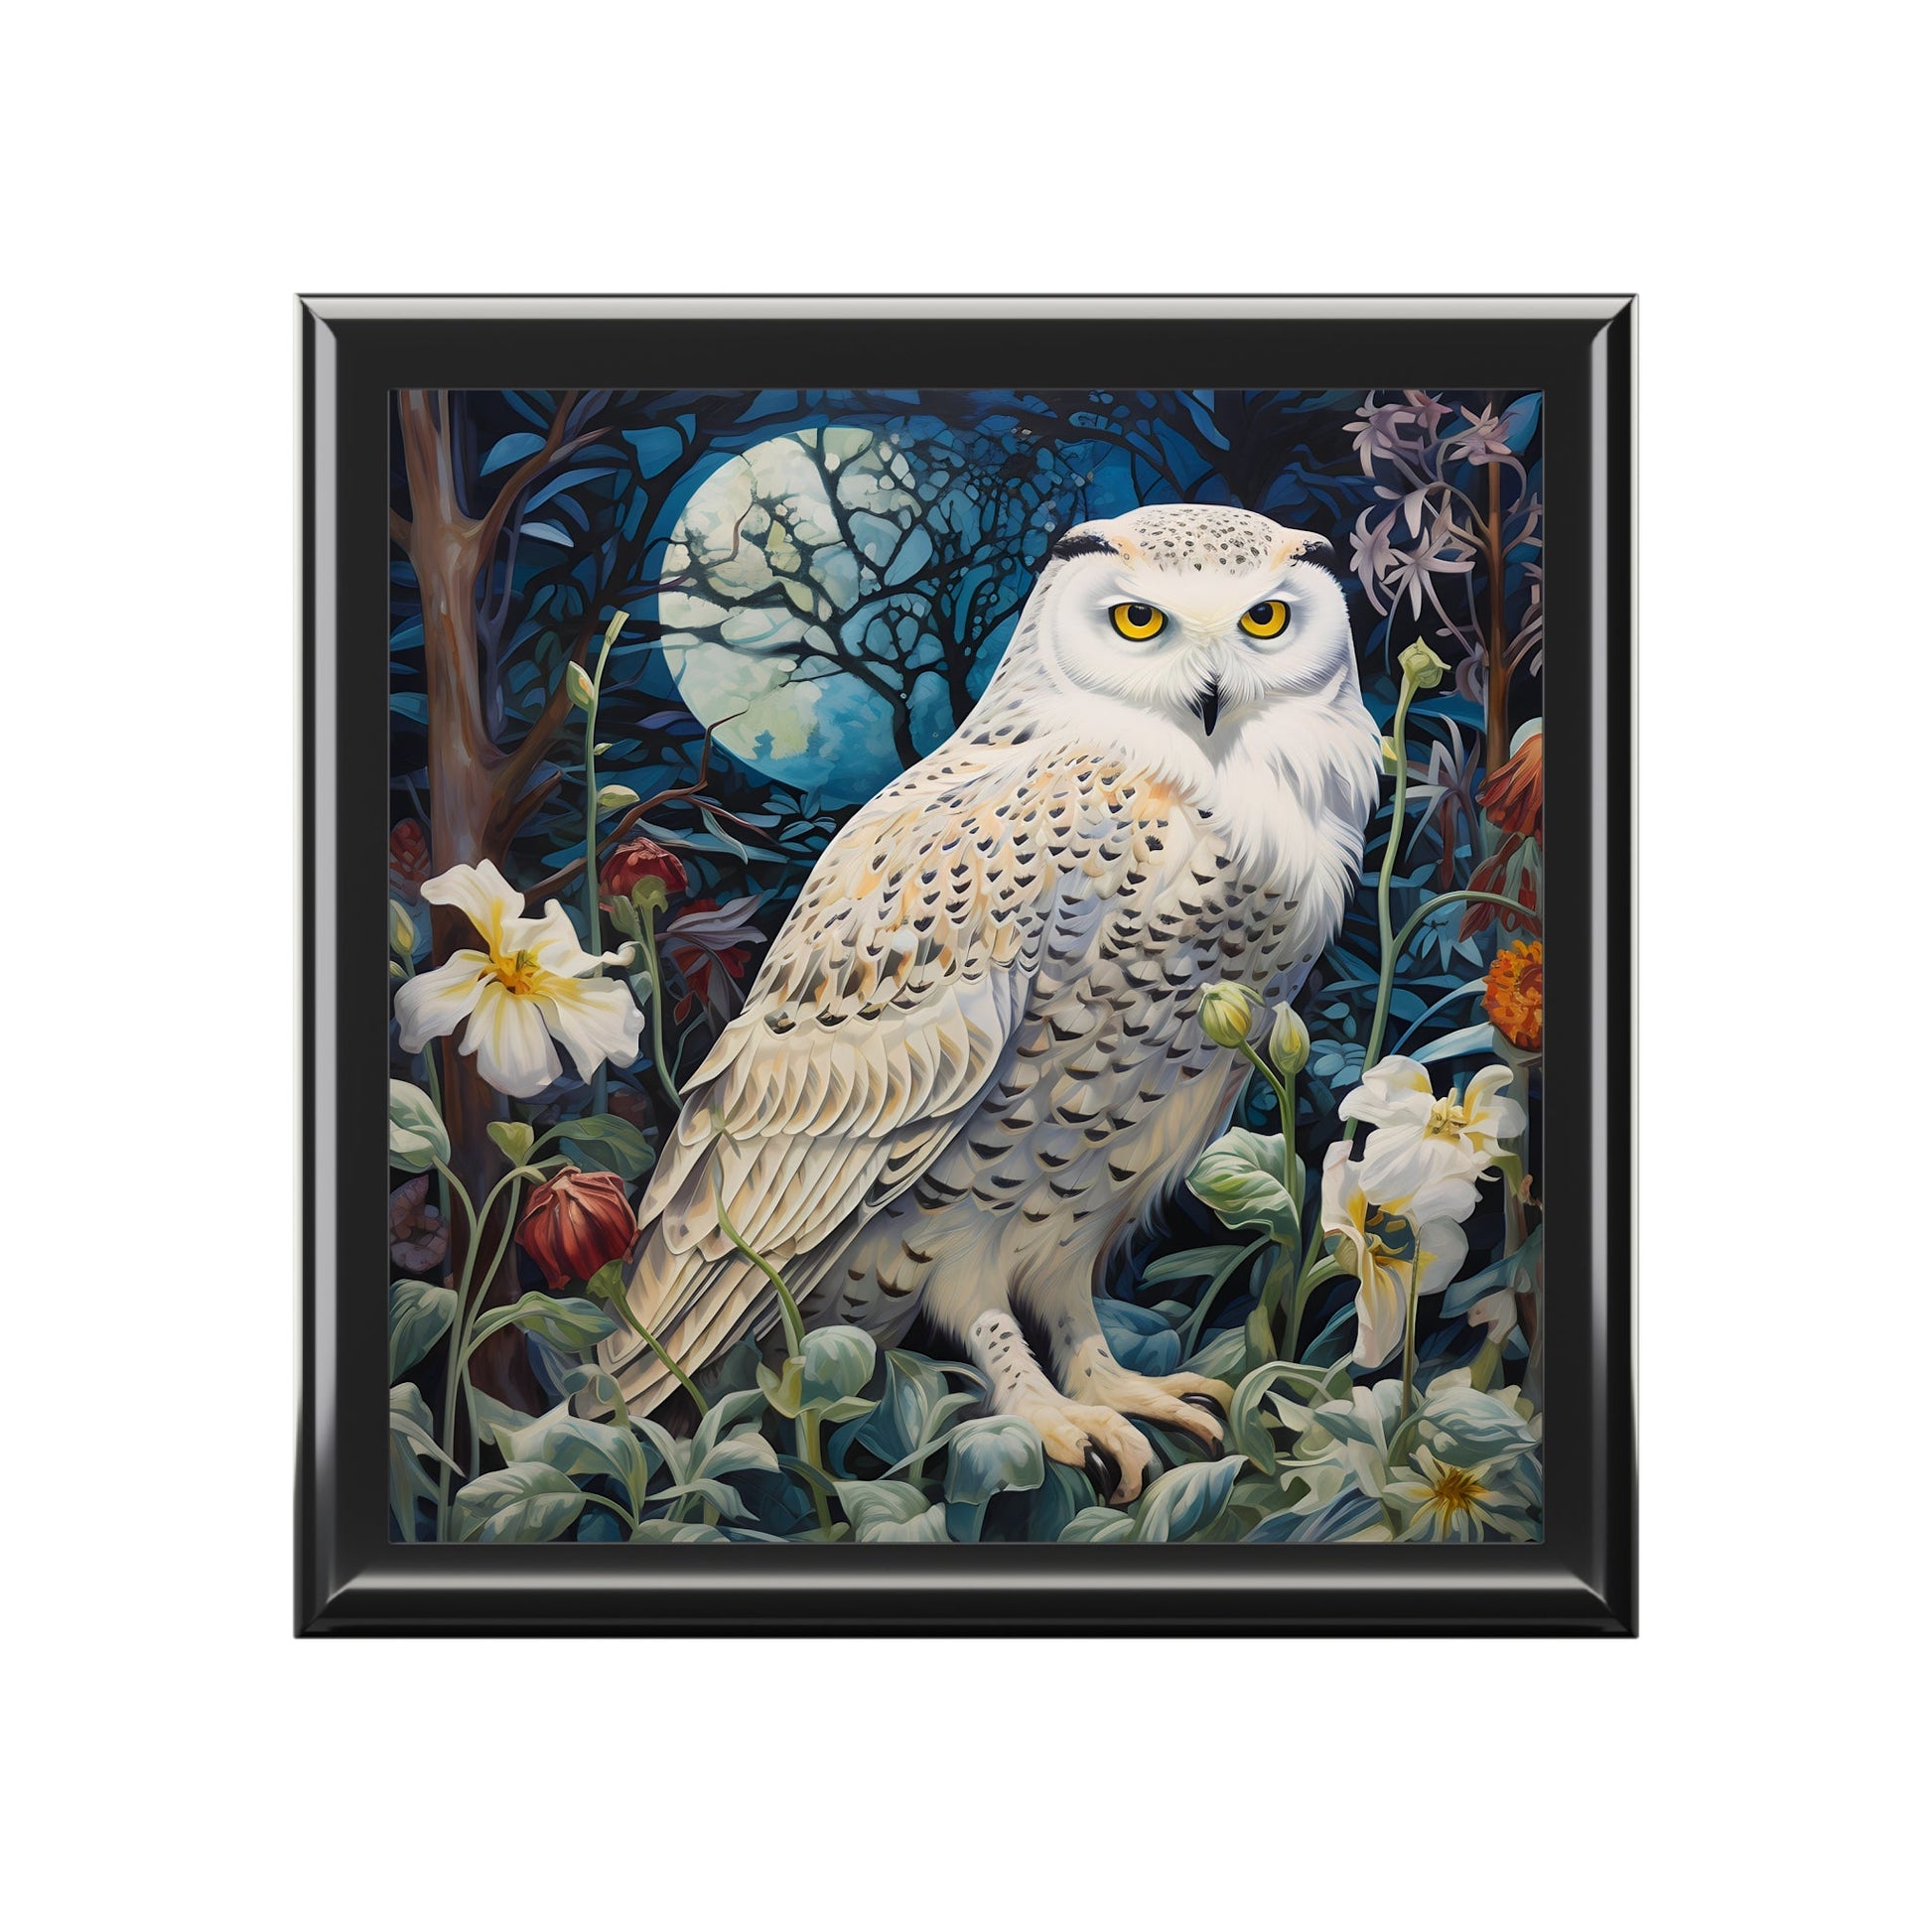 Stylized Snowy Owl on a Moonlit Night Art Print Gift and Jewelry Box